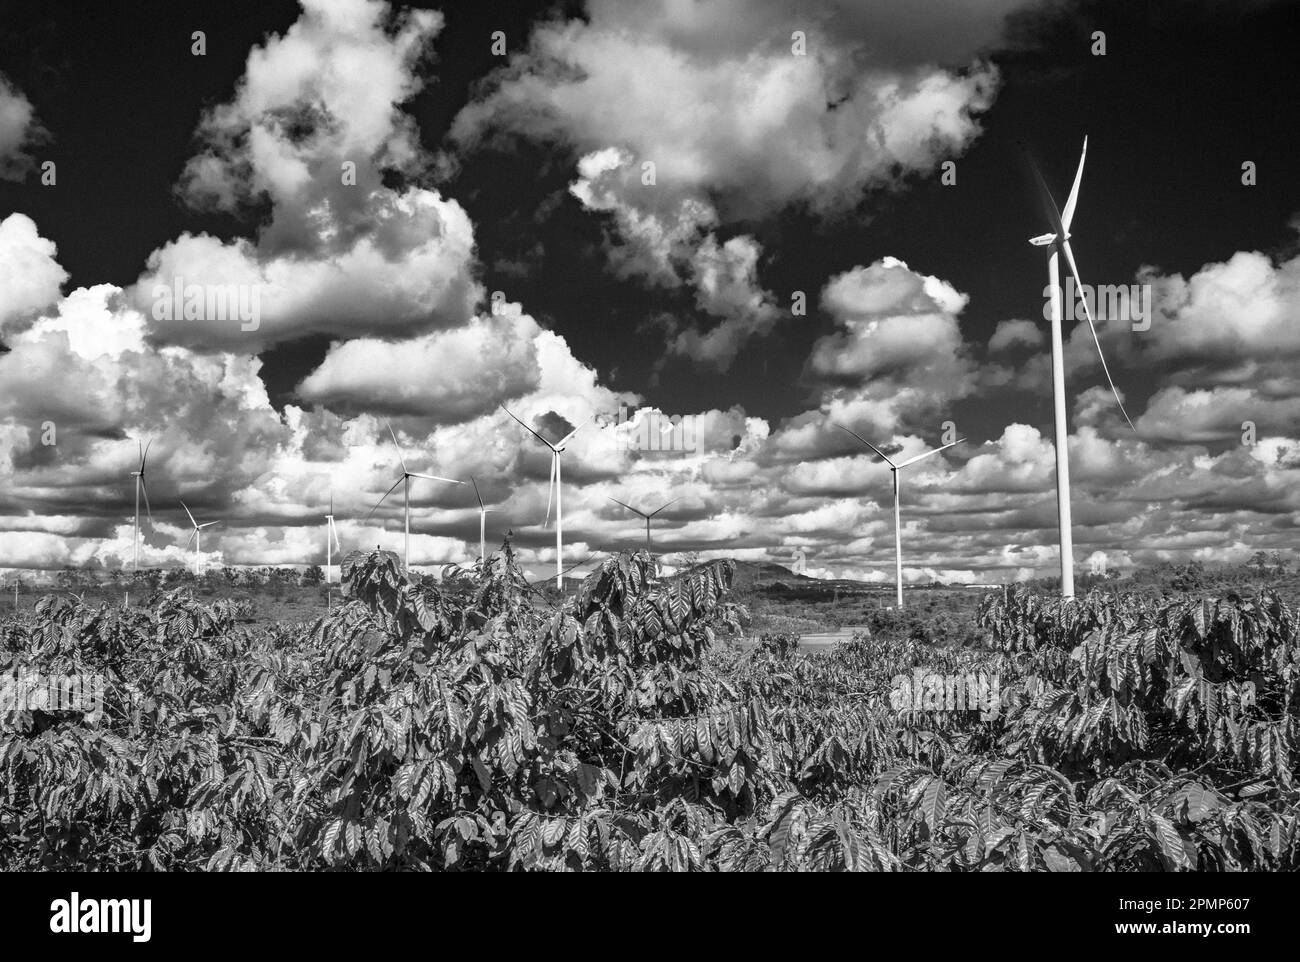 Giant wind turbines seen behind coffee trees growing in Gia Lai province in the Central Highlands of Vietnam. Stock Photo